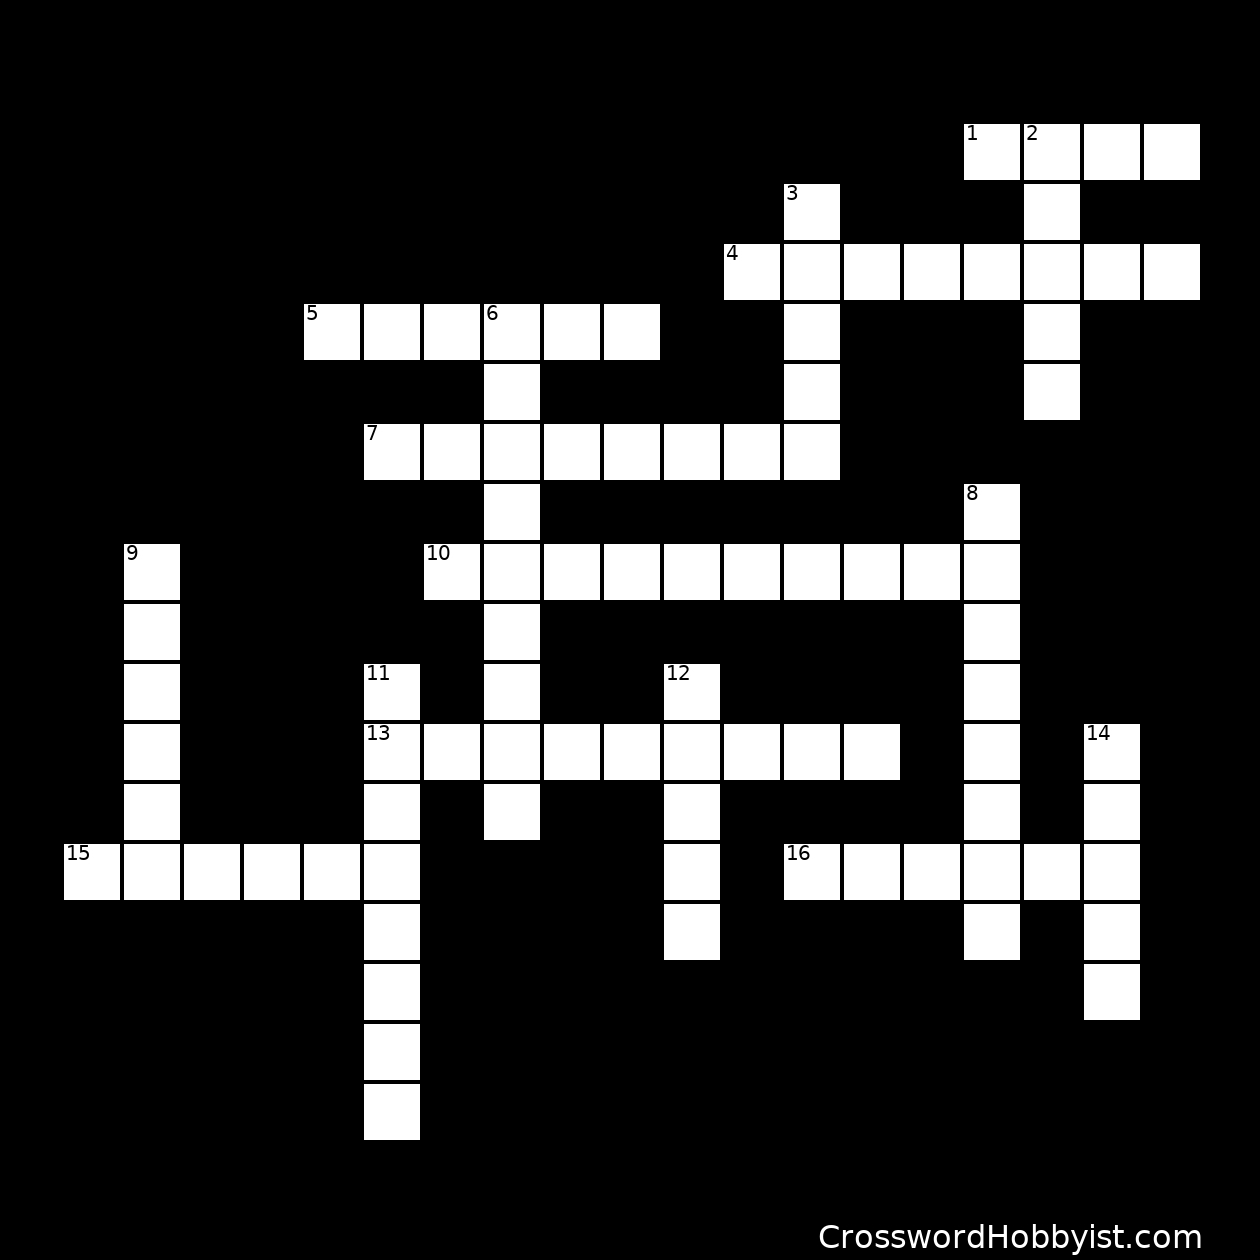 Cupid And Psyche - Crossword Puzzle - Printable Tagalog Crossword Puzzle